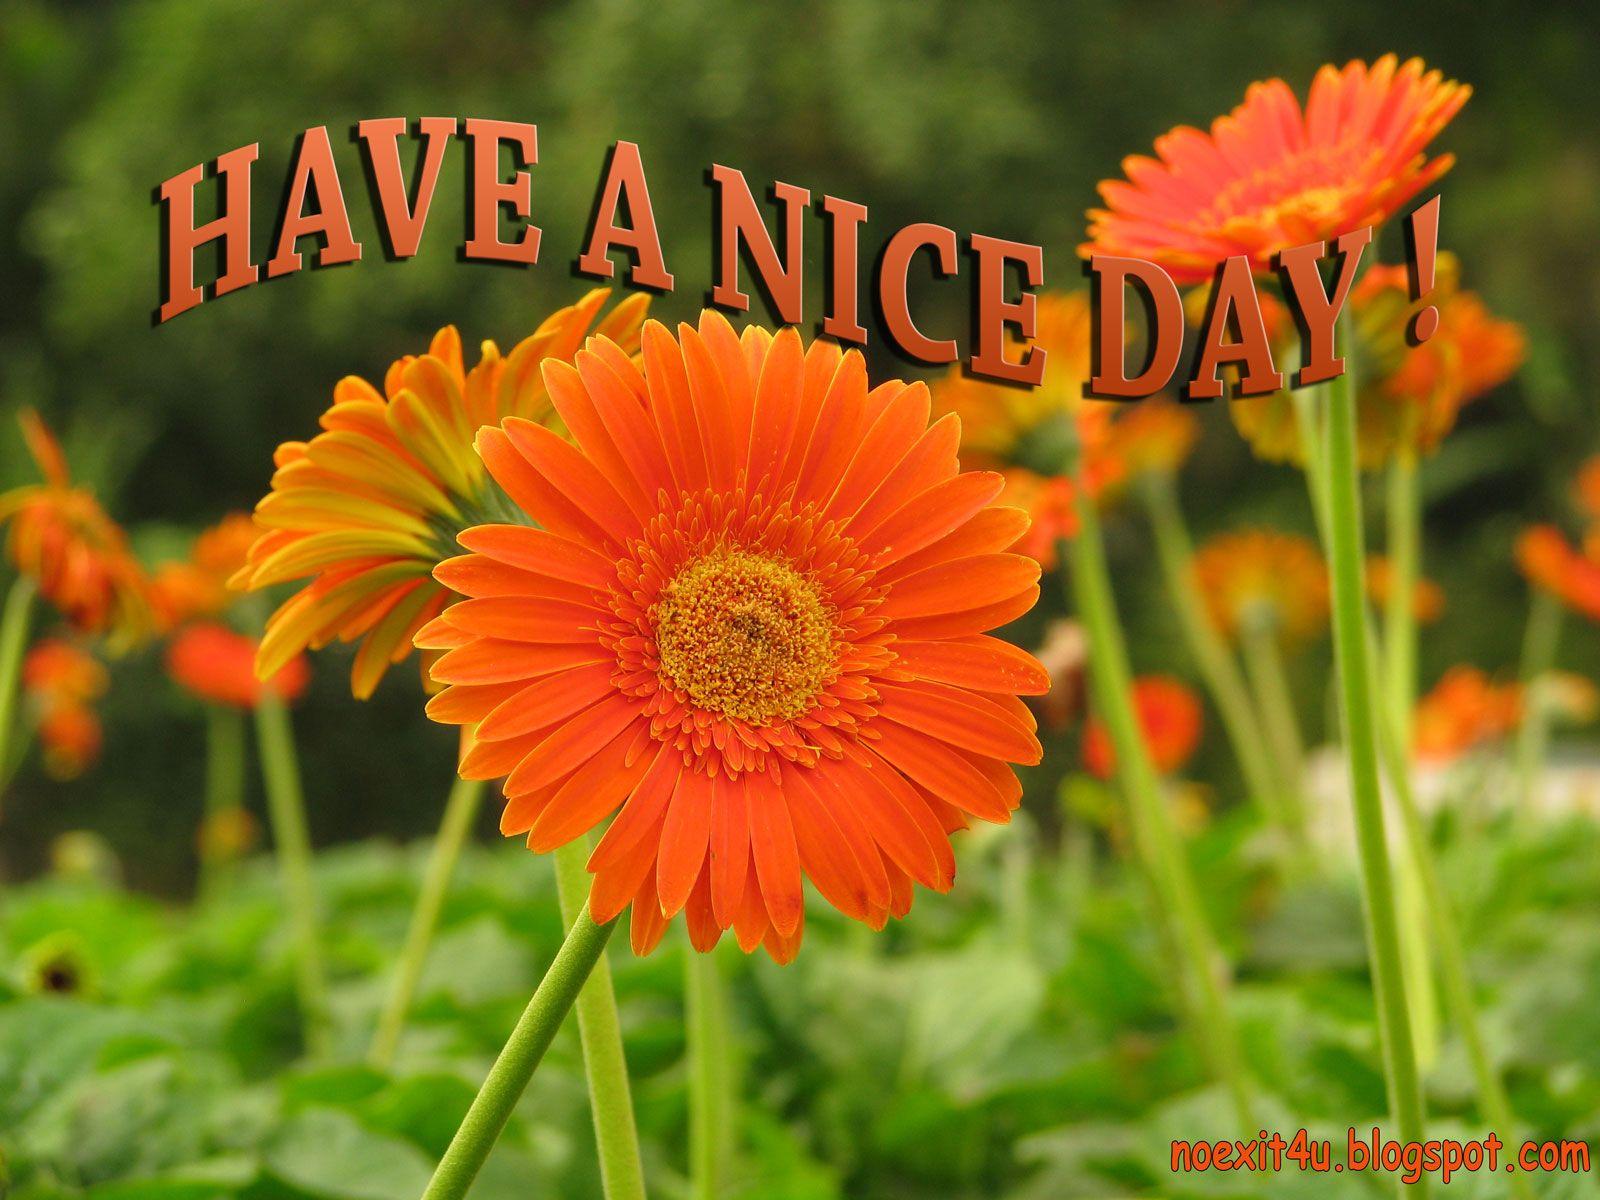 HIGH DEFINITION HAVE A NICE DAY WALLPAPER noexit4u.com